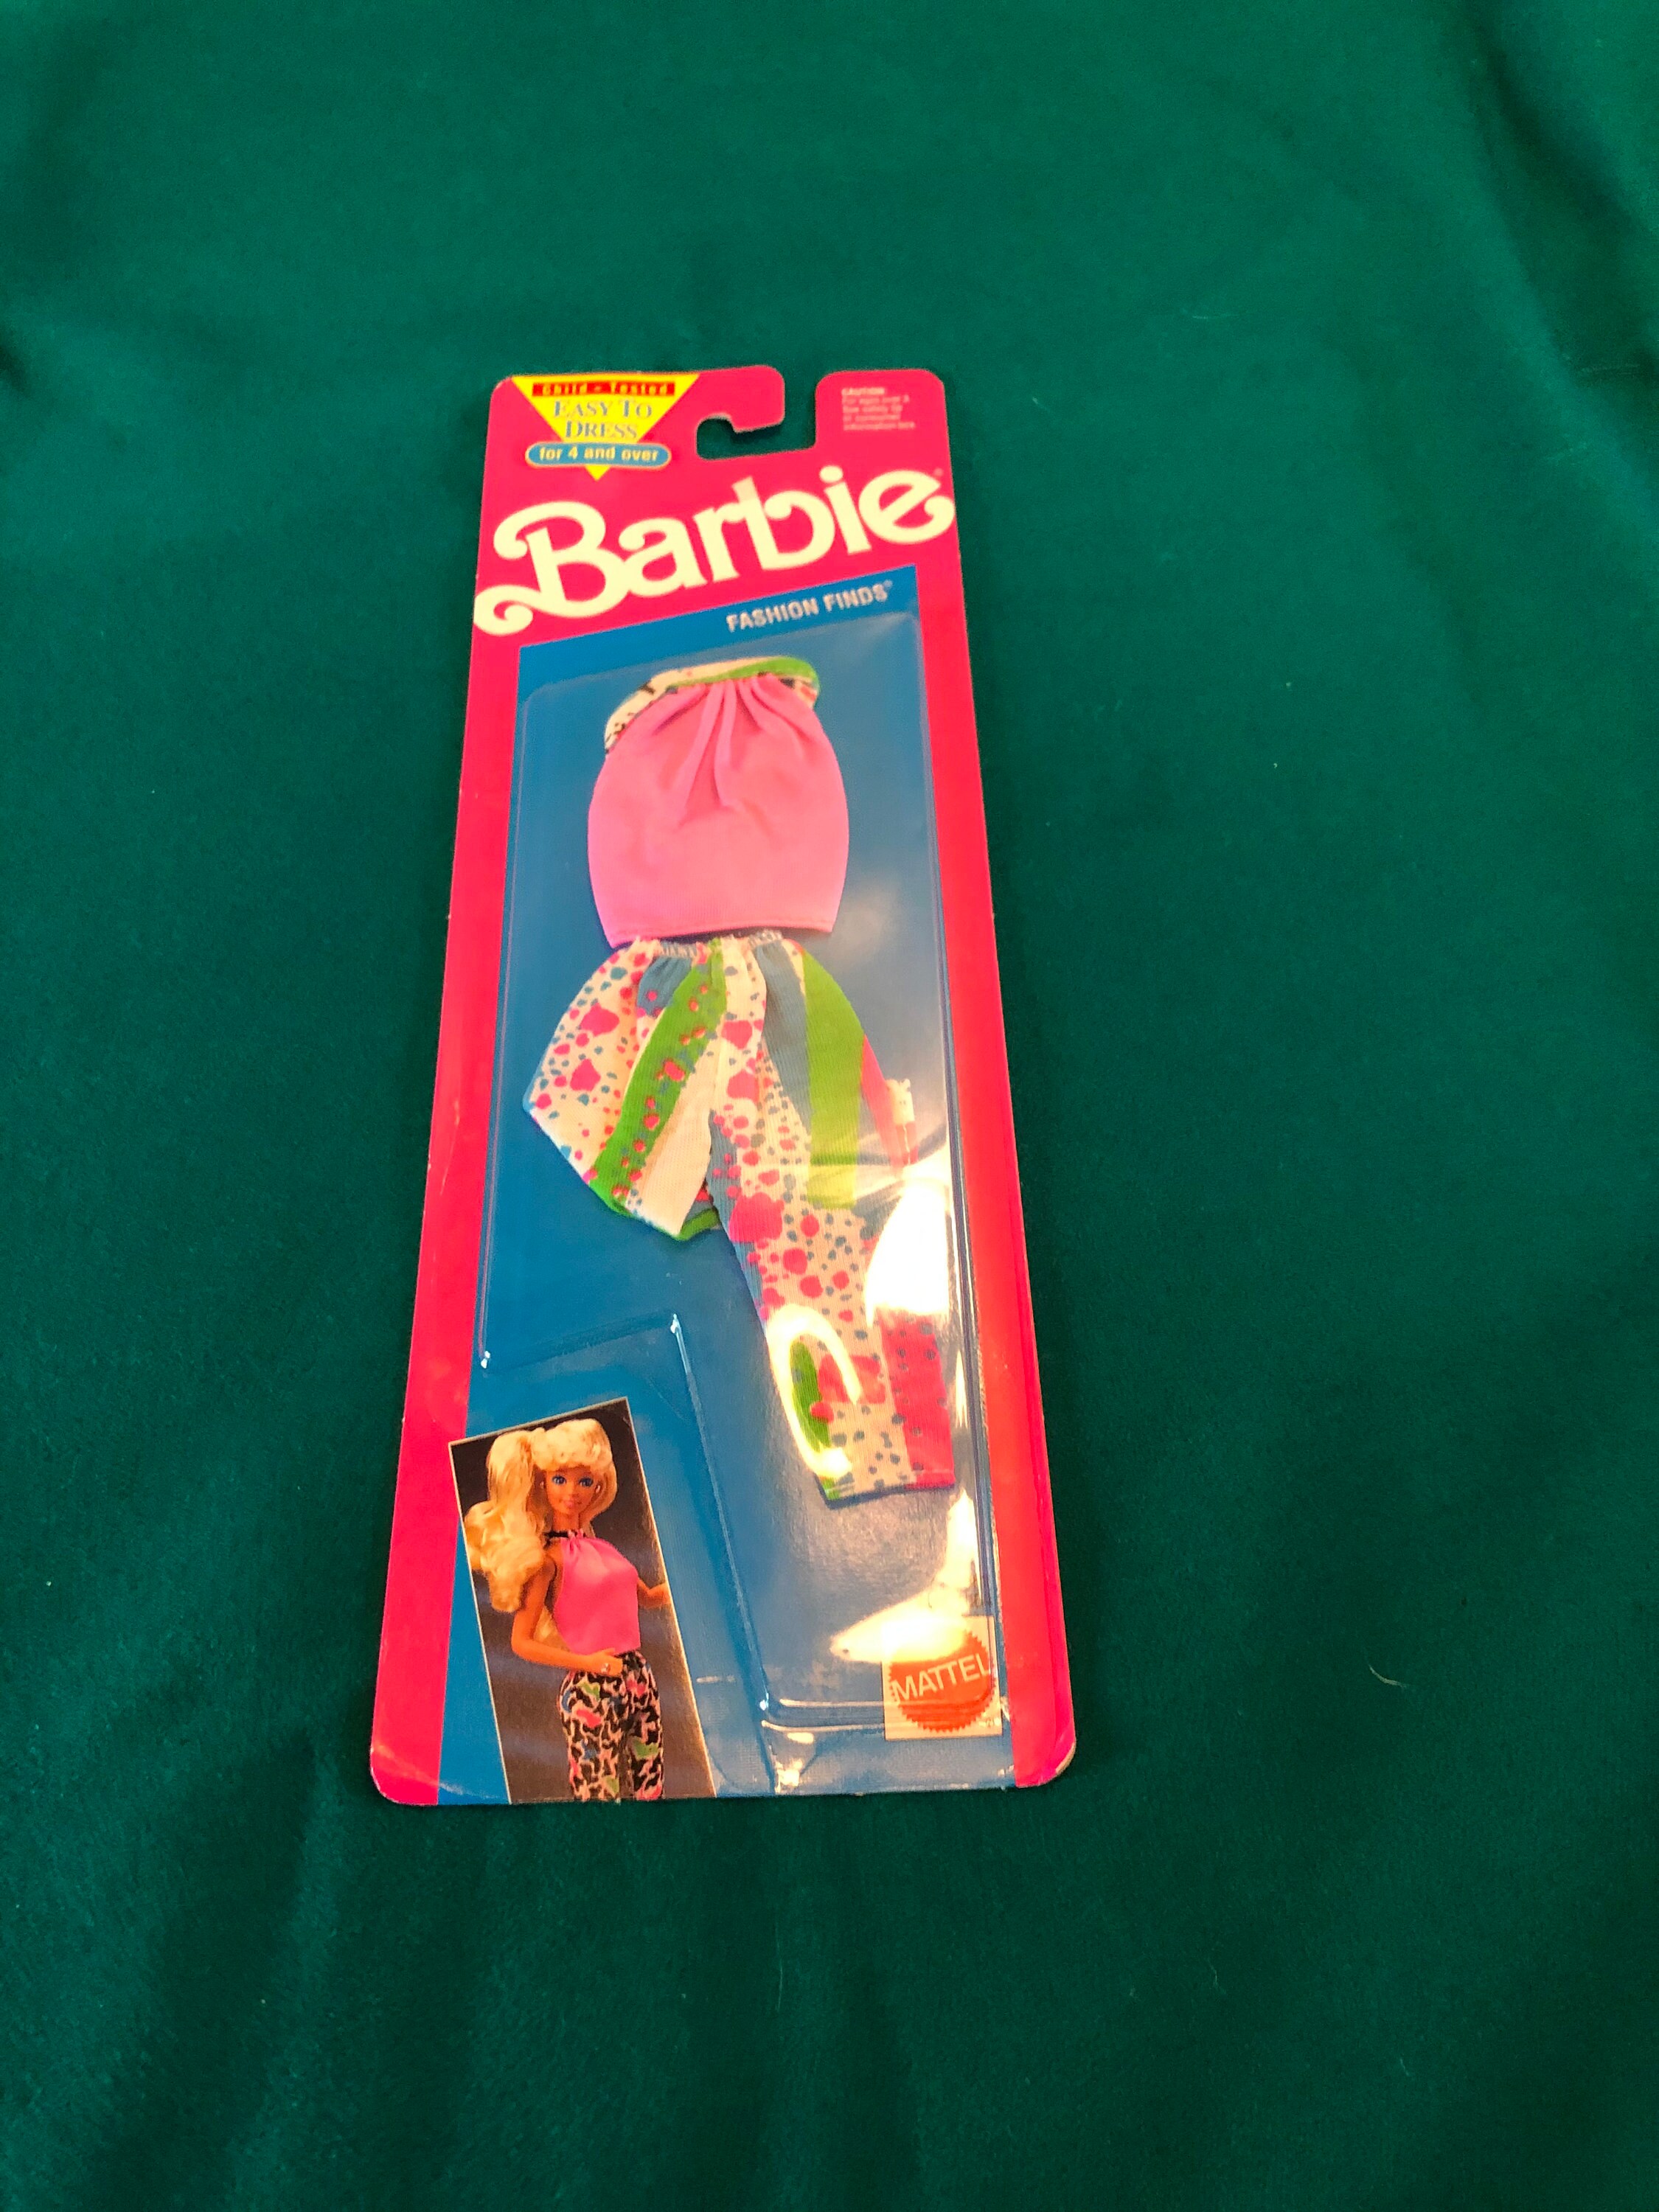 Original Barbie clothing fashion finds MOD pants and pink top unopened